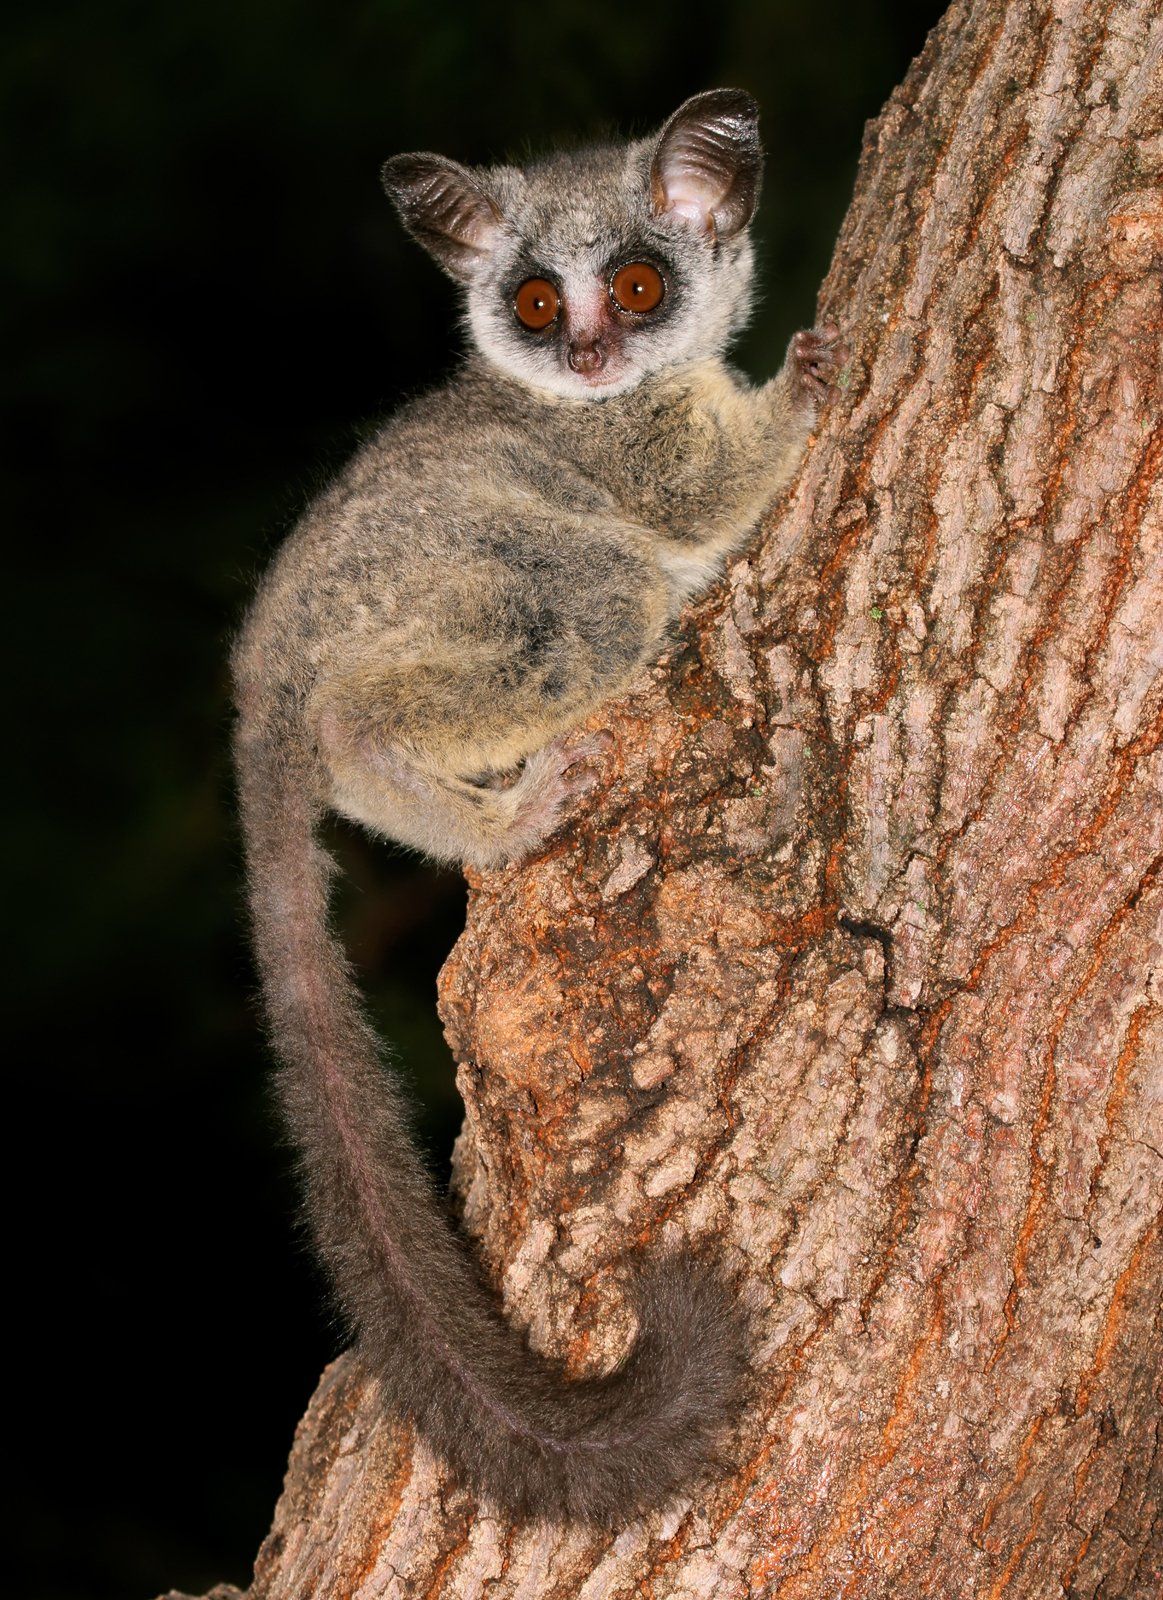 A small bush baby is sitting on a tree branch.